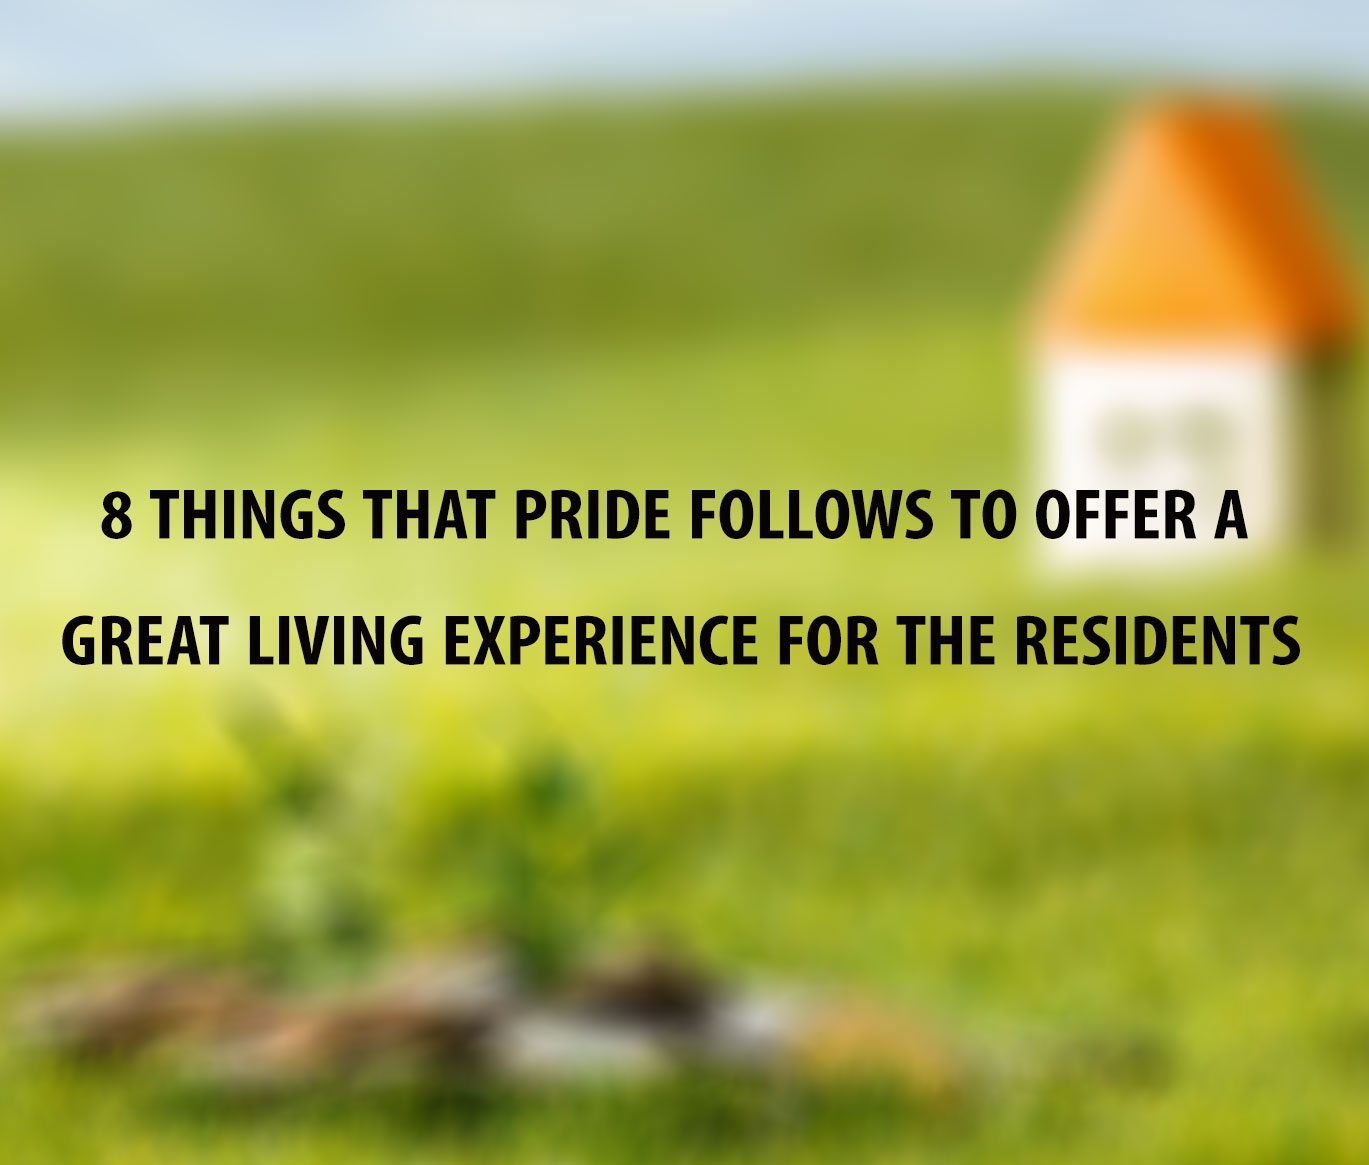 8 Things That Pride Follows to Offer a Great Living Experience for the Residents